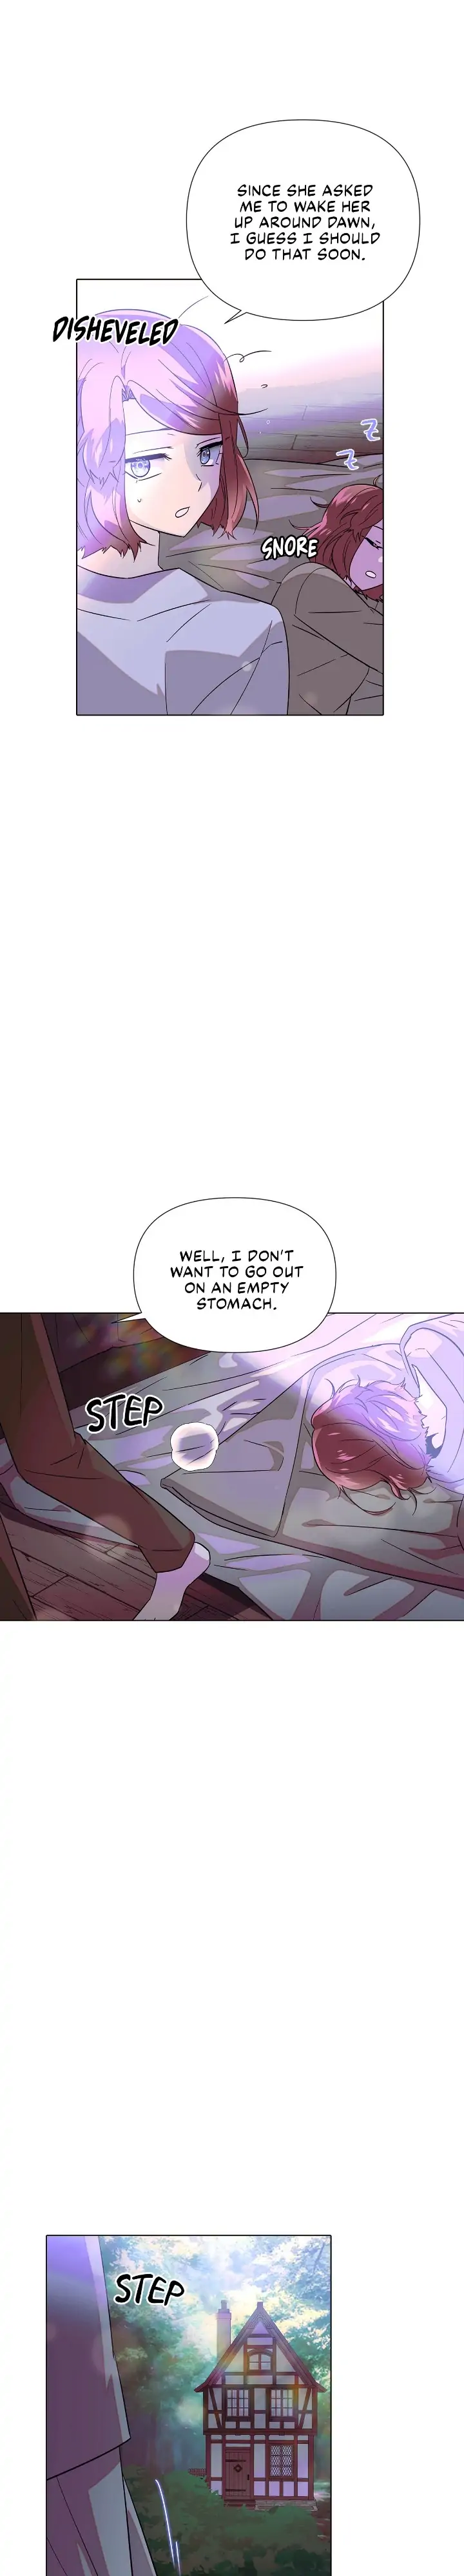 The Villain Discovered My Identity - Chapter 101 Page 4